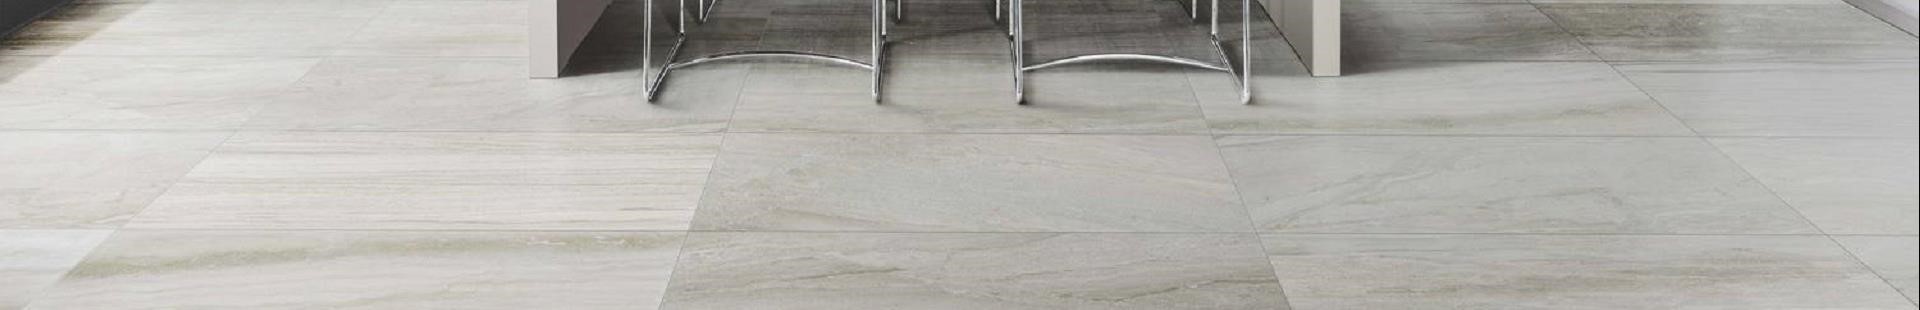 Parkland Floors Tile and Stone